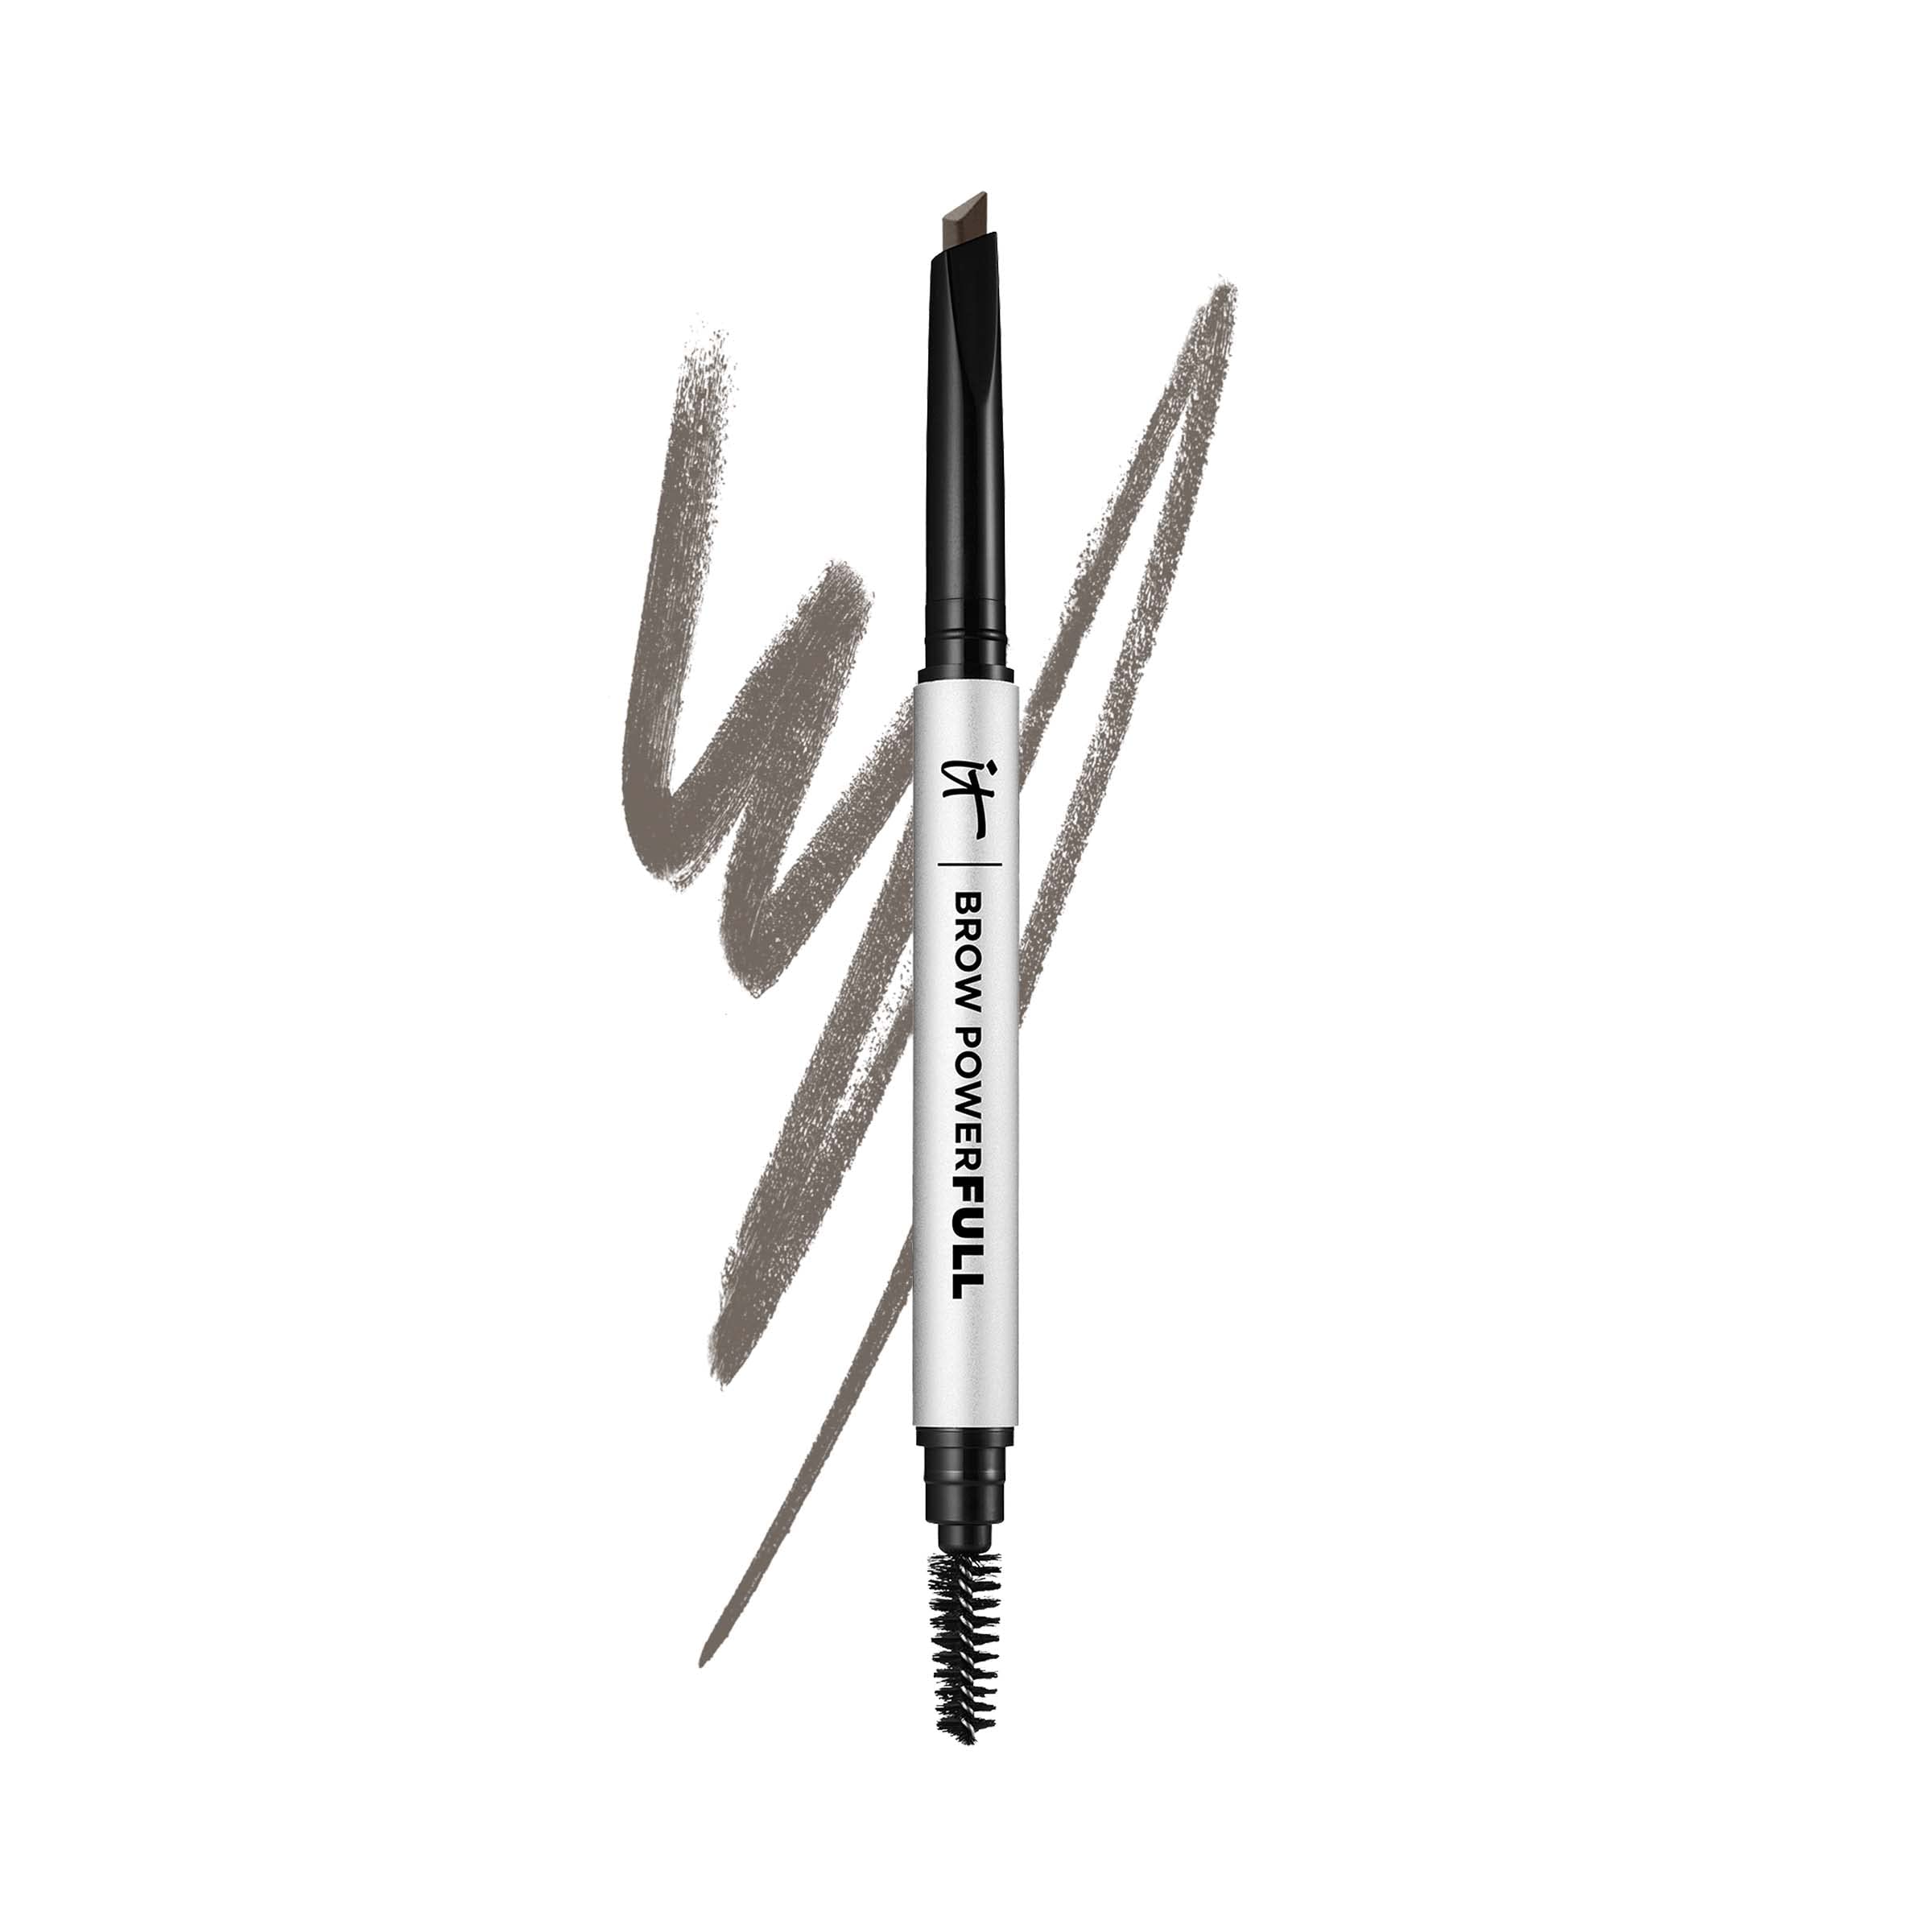 IT Cosmetics Brow PowerFULL, Universal Taupe - Universal Eyebrow Pencil with Triangular Tip - Delivers Bold Volume & Shaping - Budge-Proof Formula - Built-In Spoolie - 0.012 oz